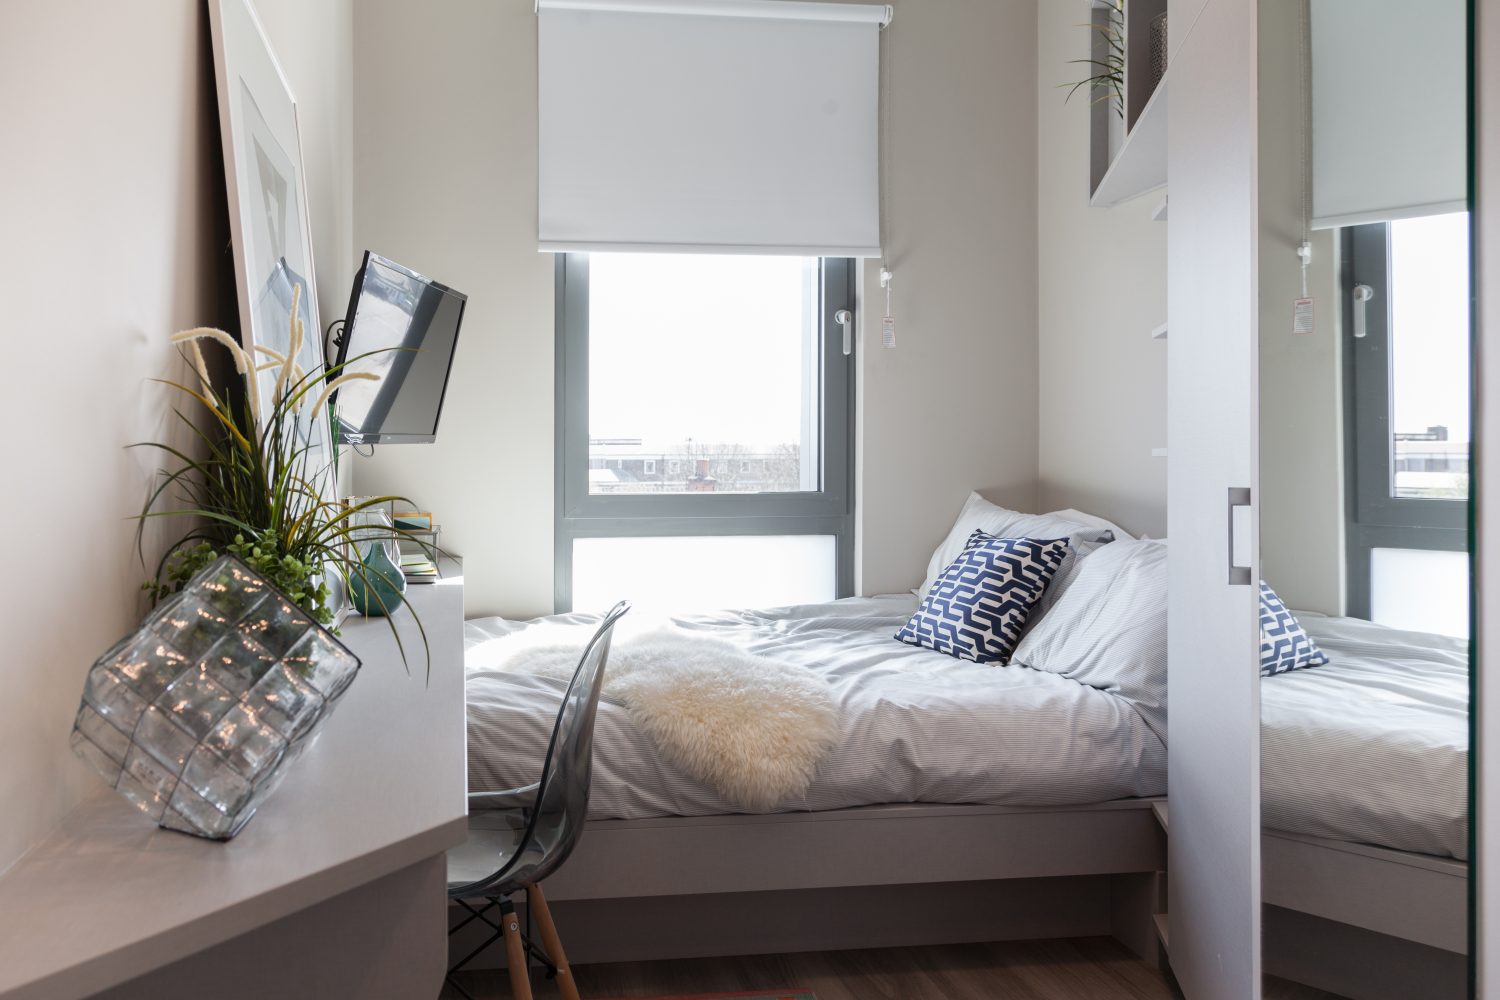 Studio apartment co-living at the Collective Old Oak